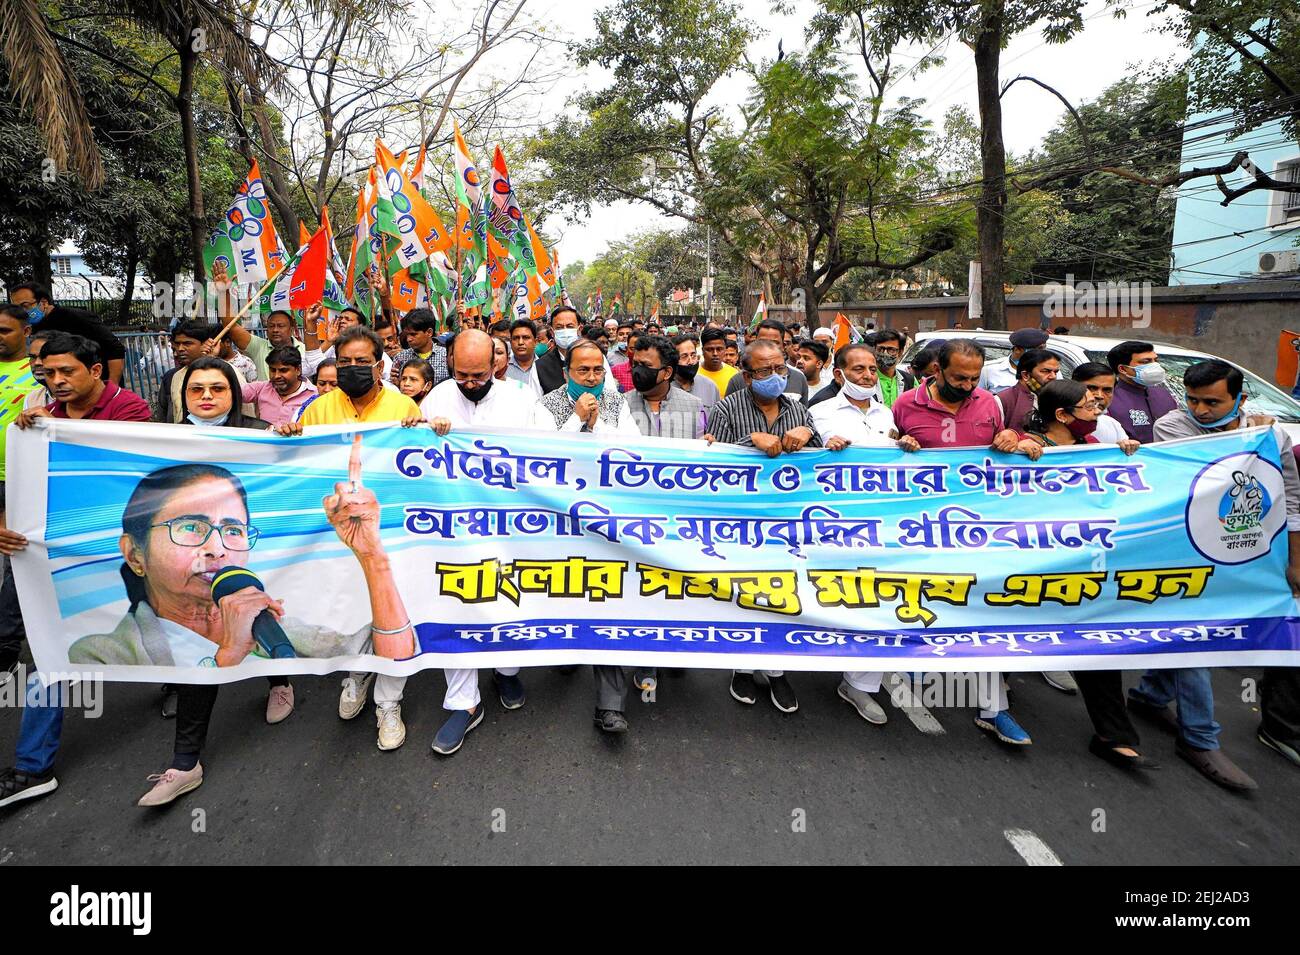 Protestors holding a large banner expressing their opinion during the demonstration.All India Trinamool Congress protest against the regular price hike on Petrol & Diesel in front of an Indian Oil Petrol Pump. Stock Photo